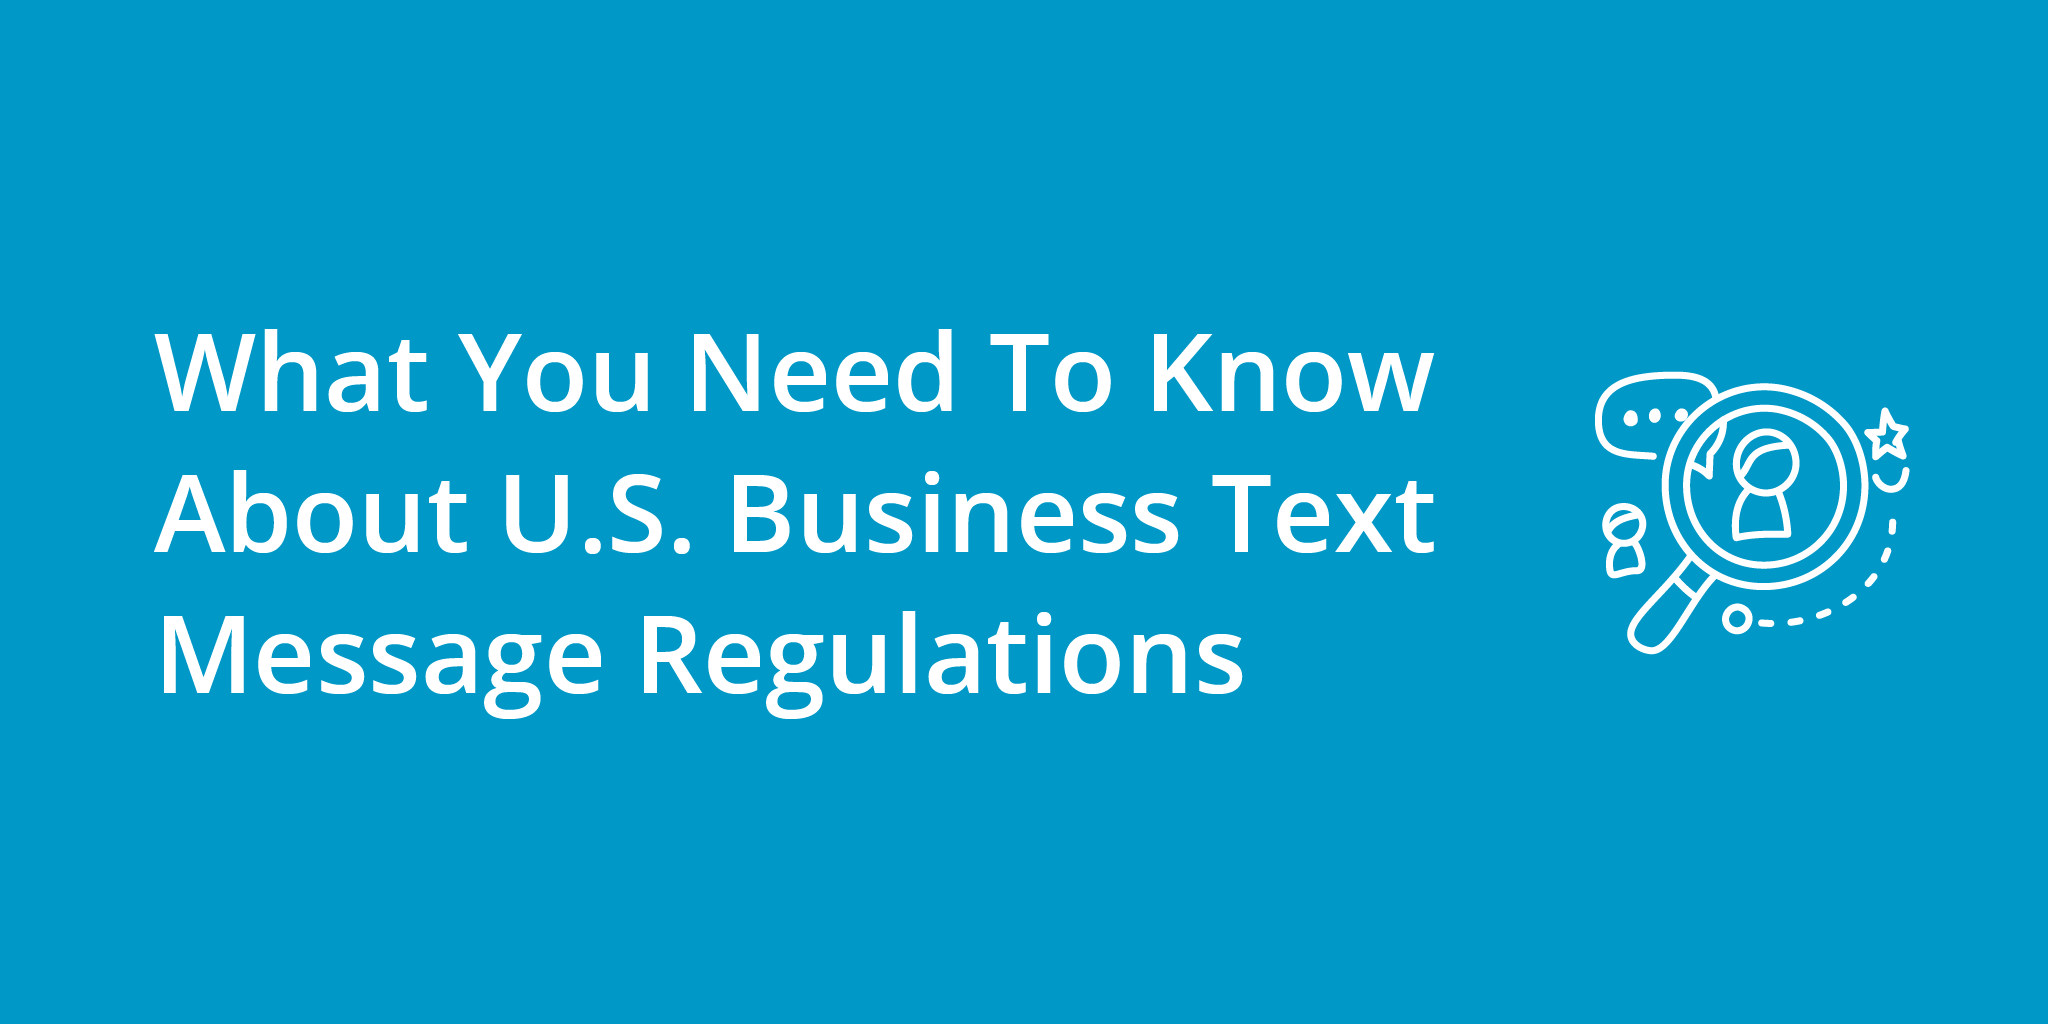 What You Need To Know About U.S. Business Text Message Regulations | Telephones for business